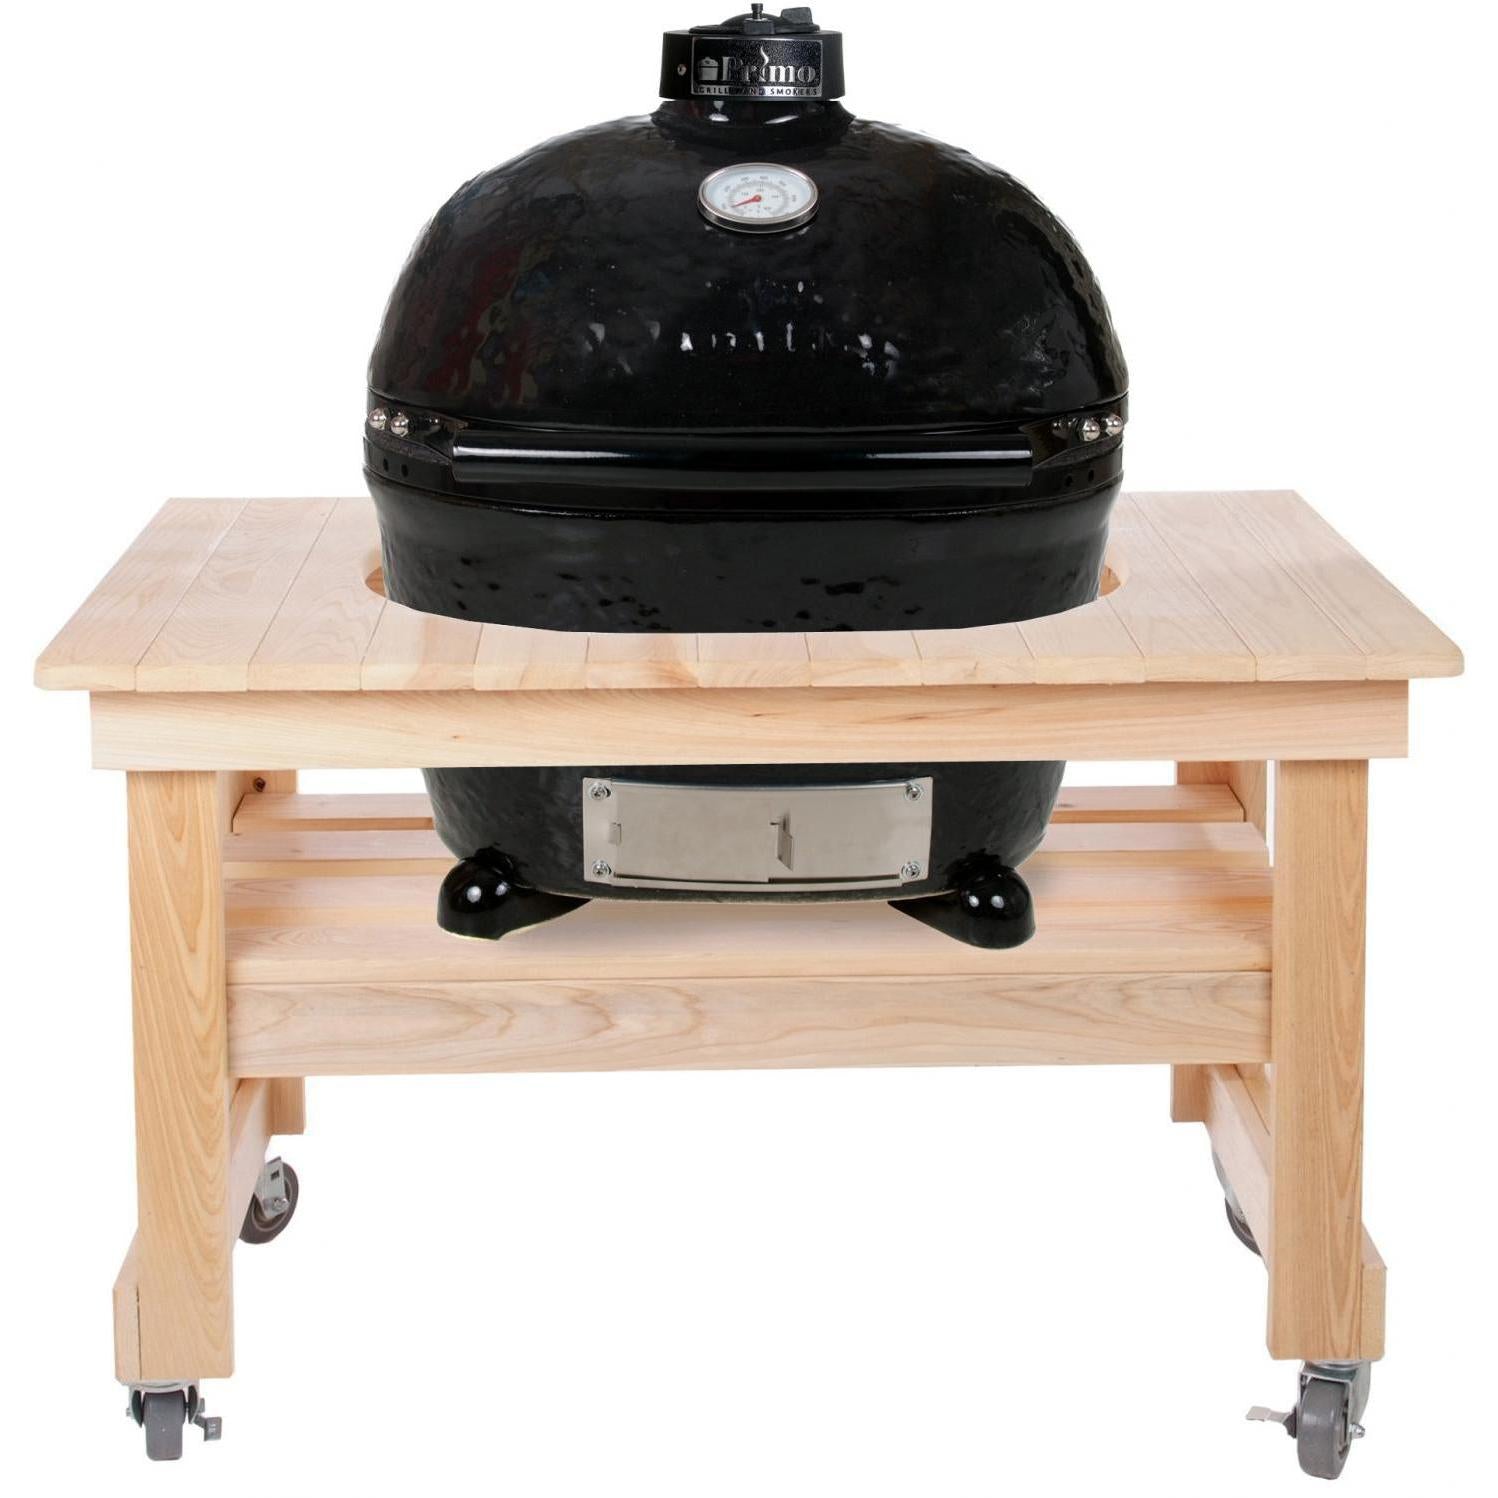 Primo Oval Ceramic Grill On Compact Cypress Table – BBQHangout